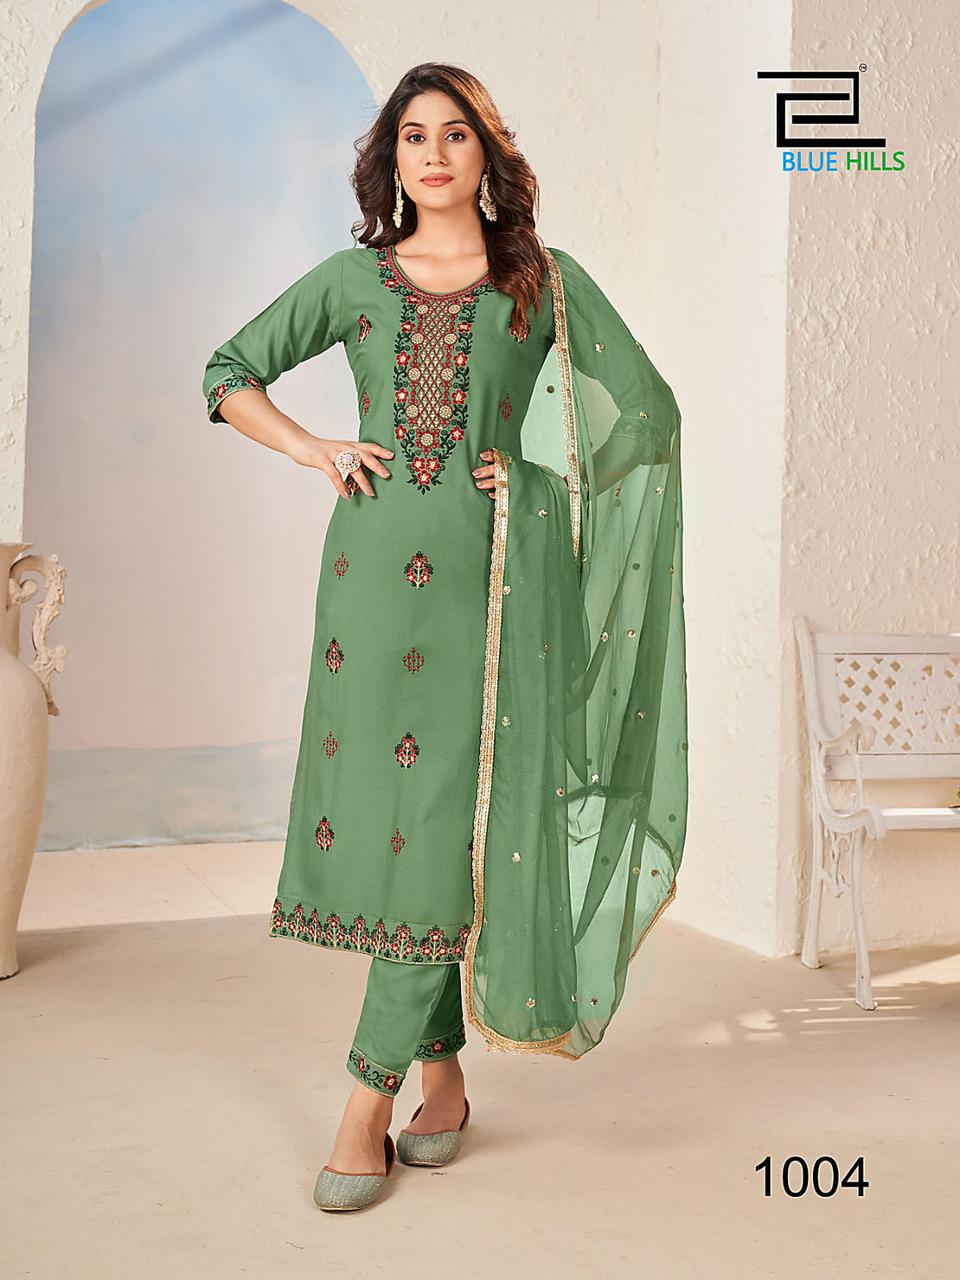 Gulab Jal Blue Hills Rayon Readymade Pant Style Suits